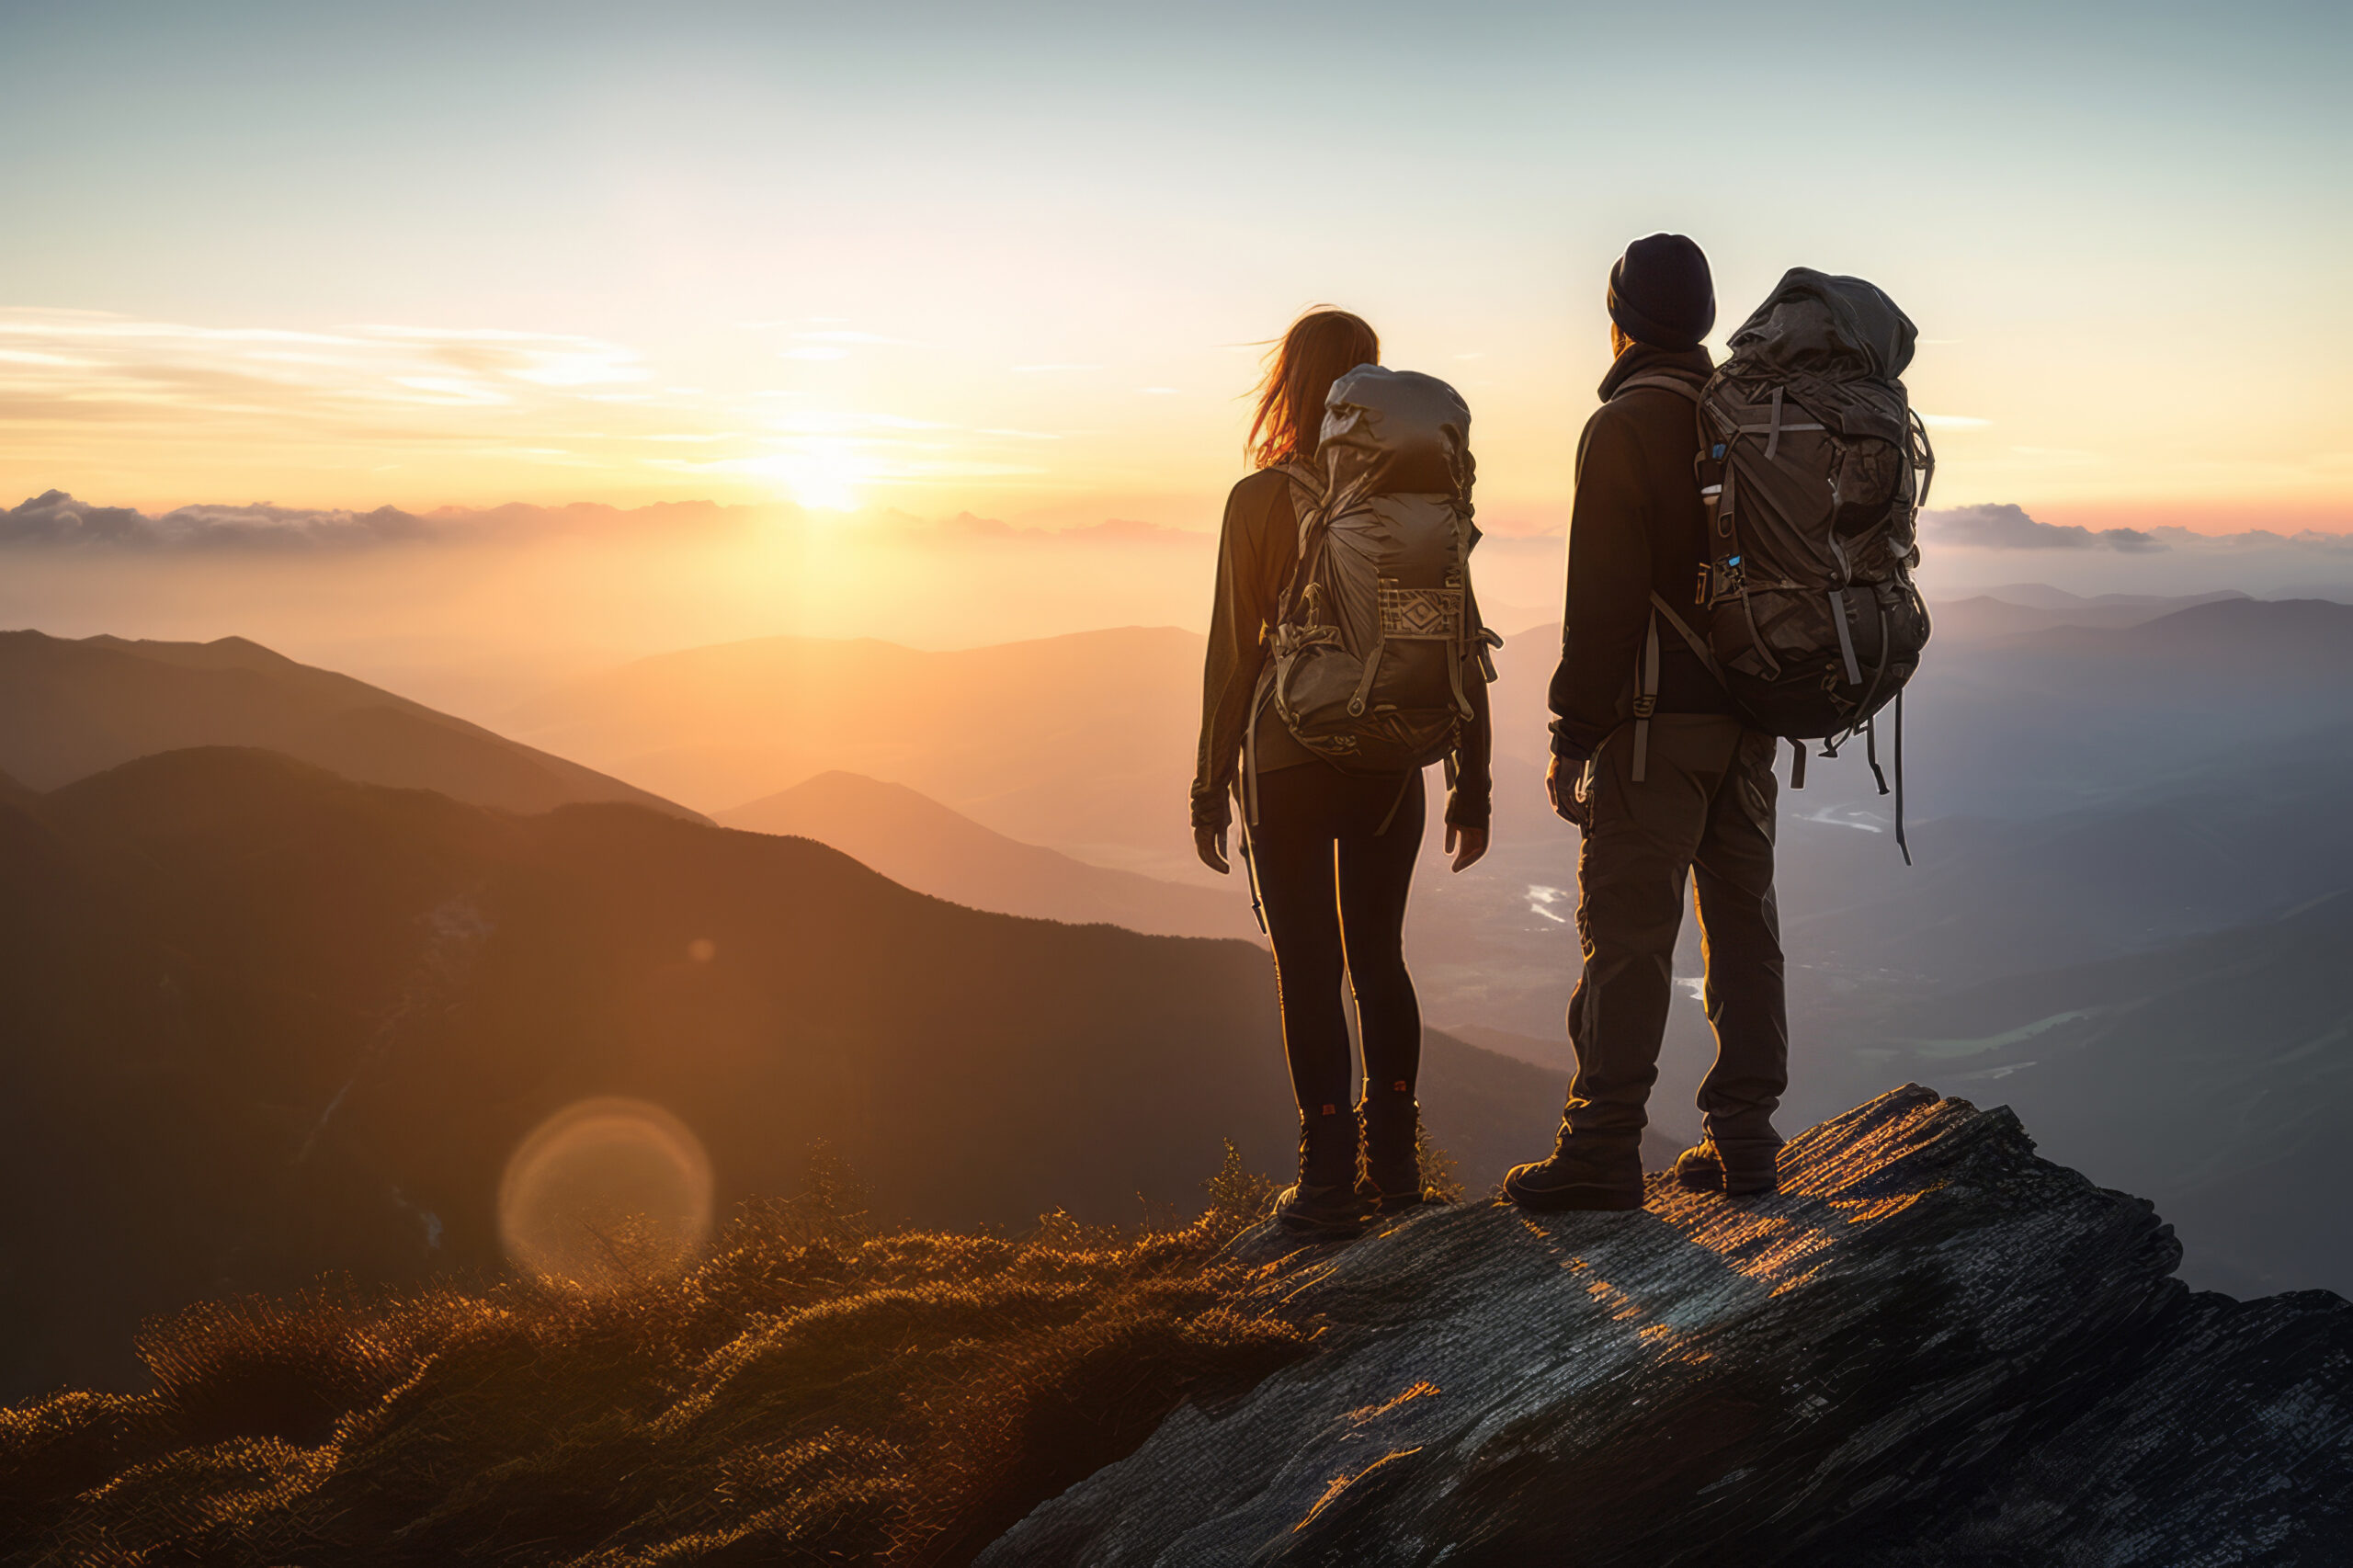 Couple of man and woman hikers on top of a mountain at sunset or sunrise, together enjoying their climbing success and the breathtaking view, looking towards the horizon